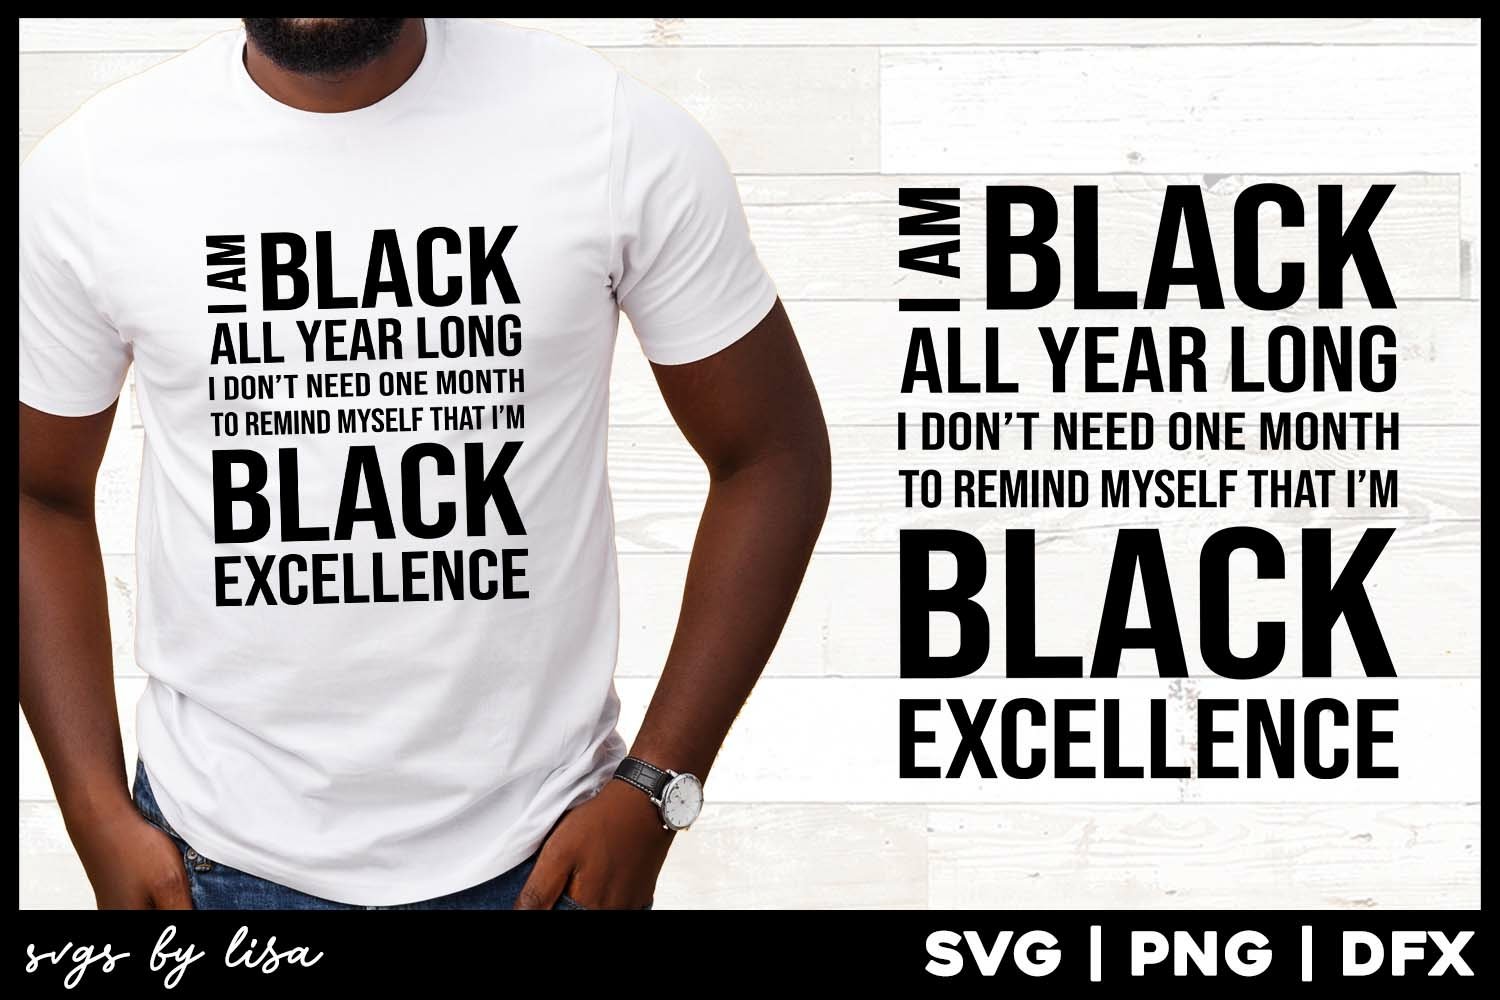 I am black all year long - quote for t-shirt design.